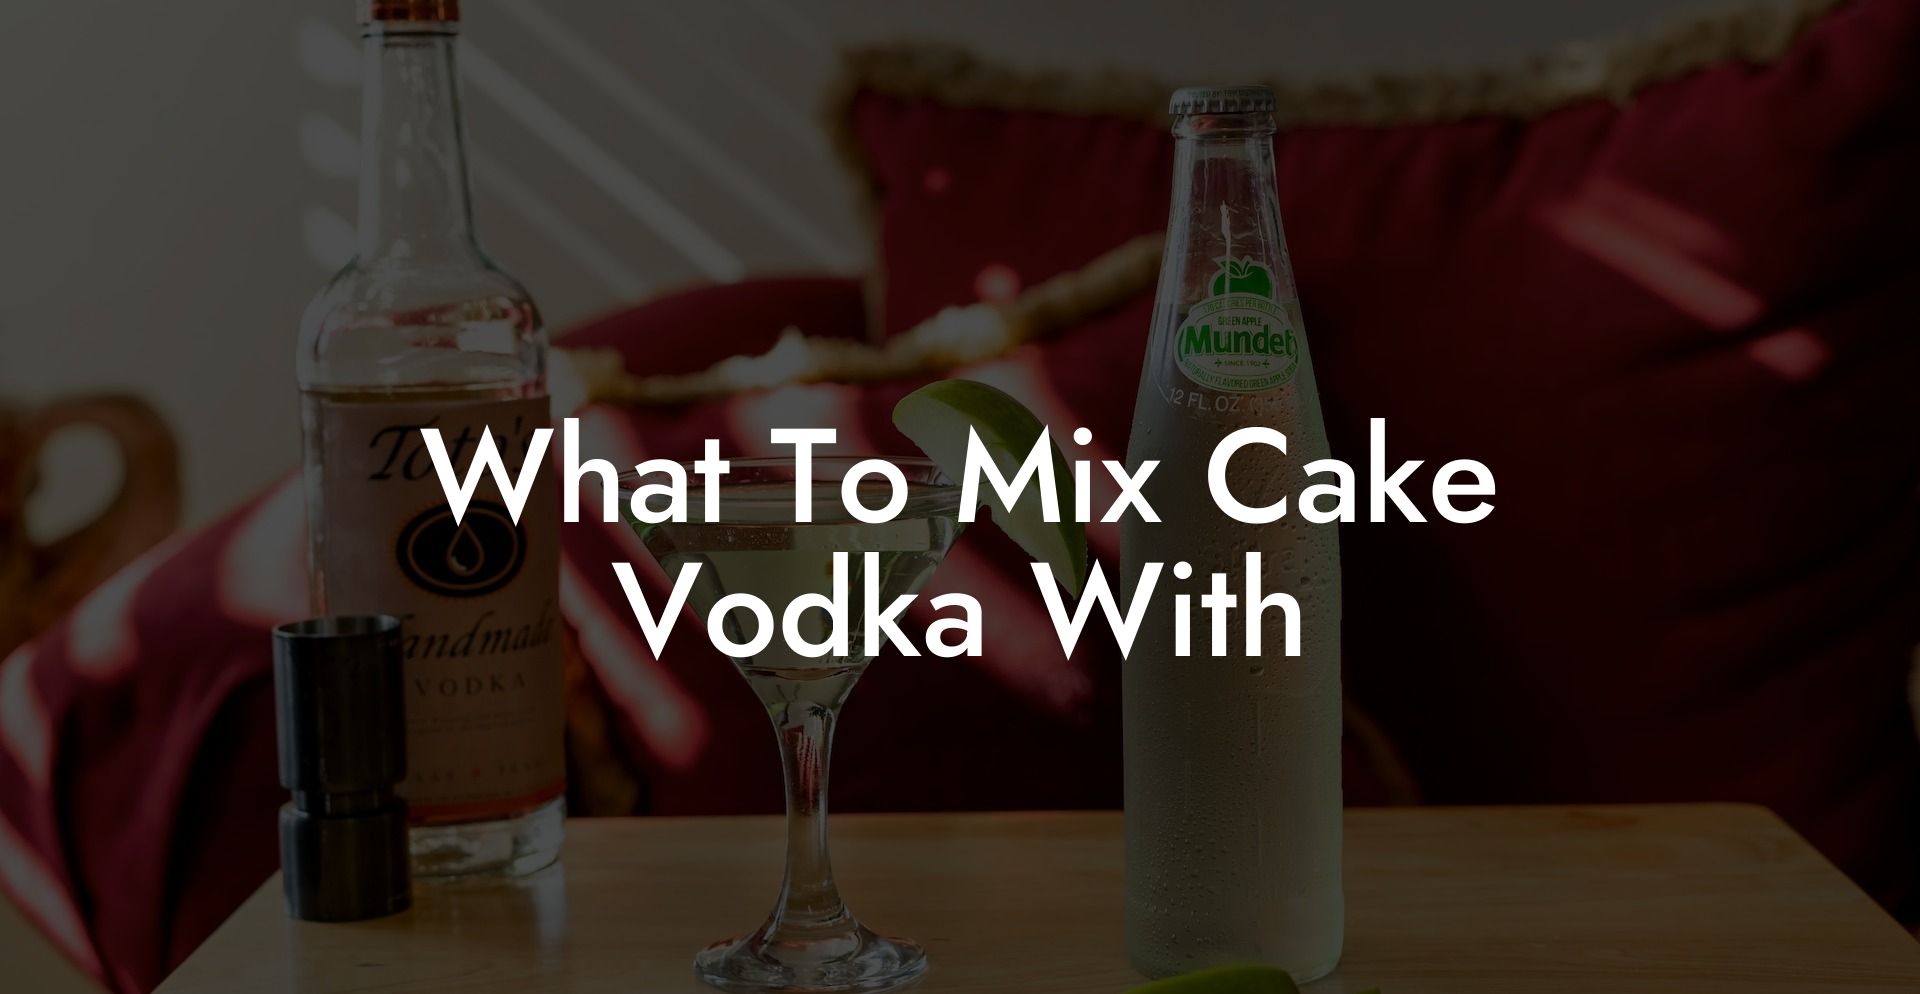 What To Mix Cake Vodka With